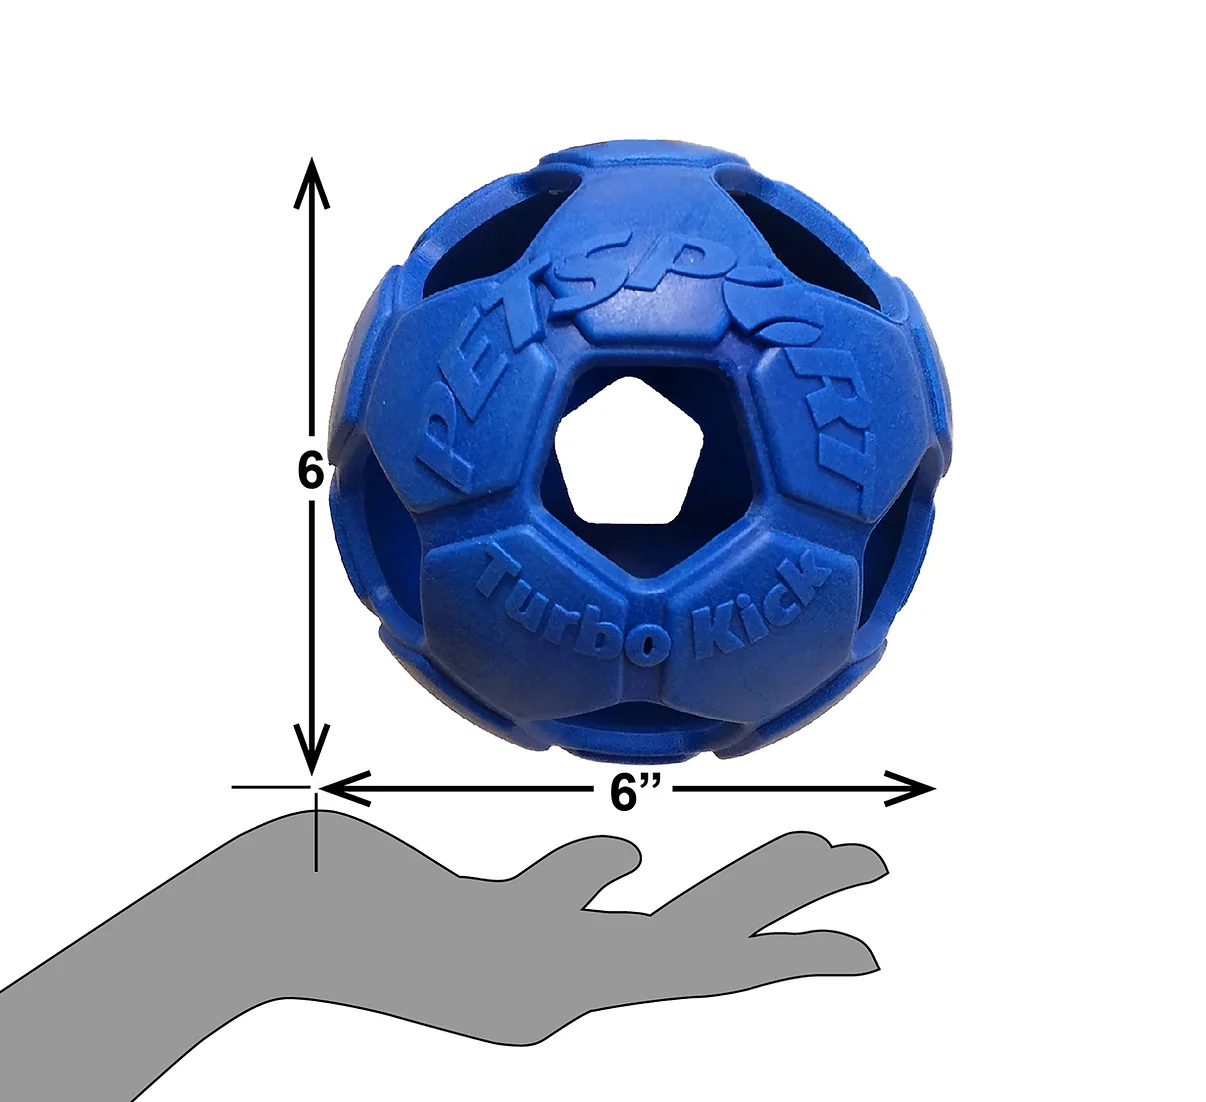 Petsport Turbo Kick Soccer Ball Assorted Colors 6 Inch